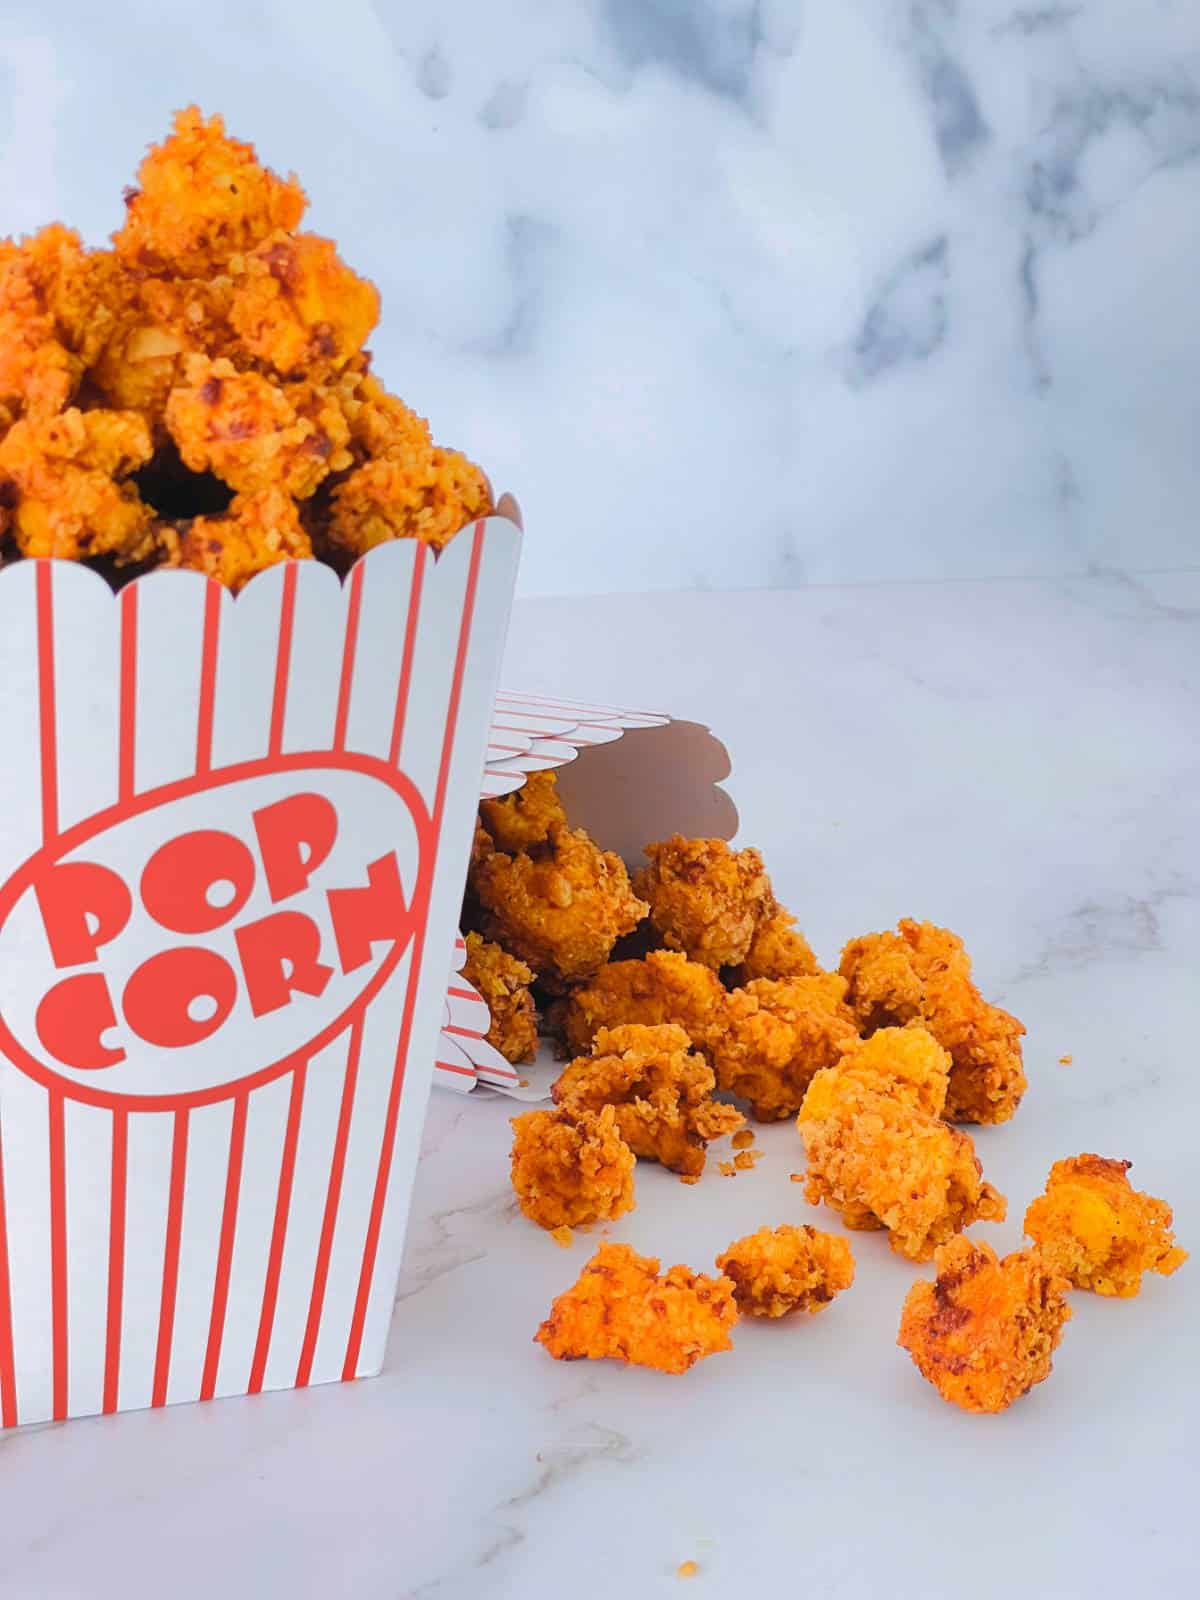 Popcorn chicken placed in paper box on a marble background.